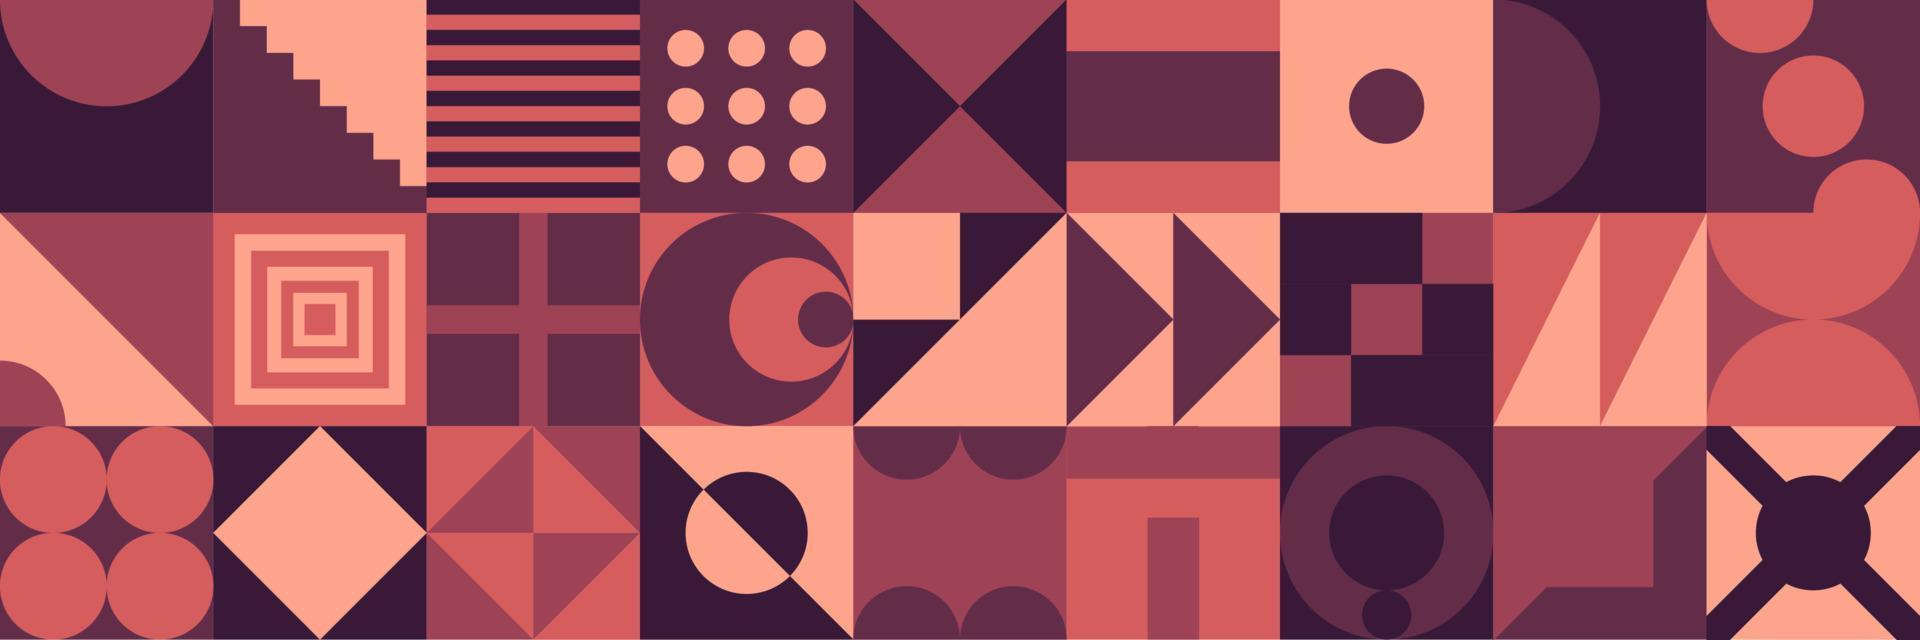 Neo Modernism artwork pattern made with abstract vector geometric shapes and forms. Vector illustration